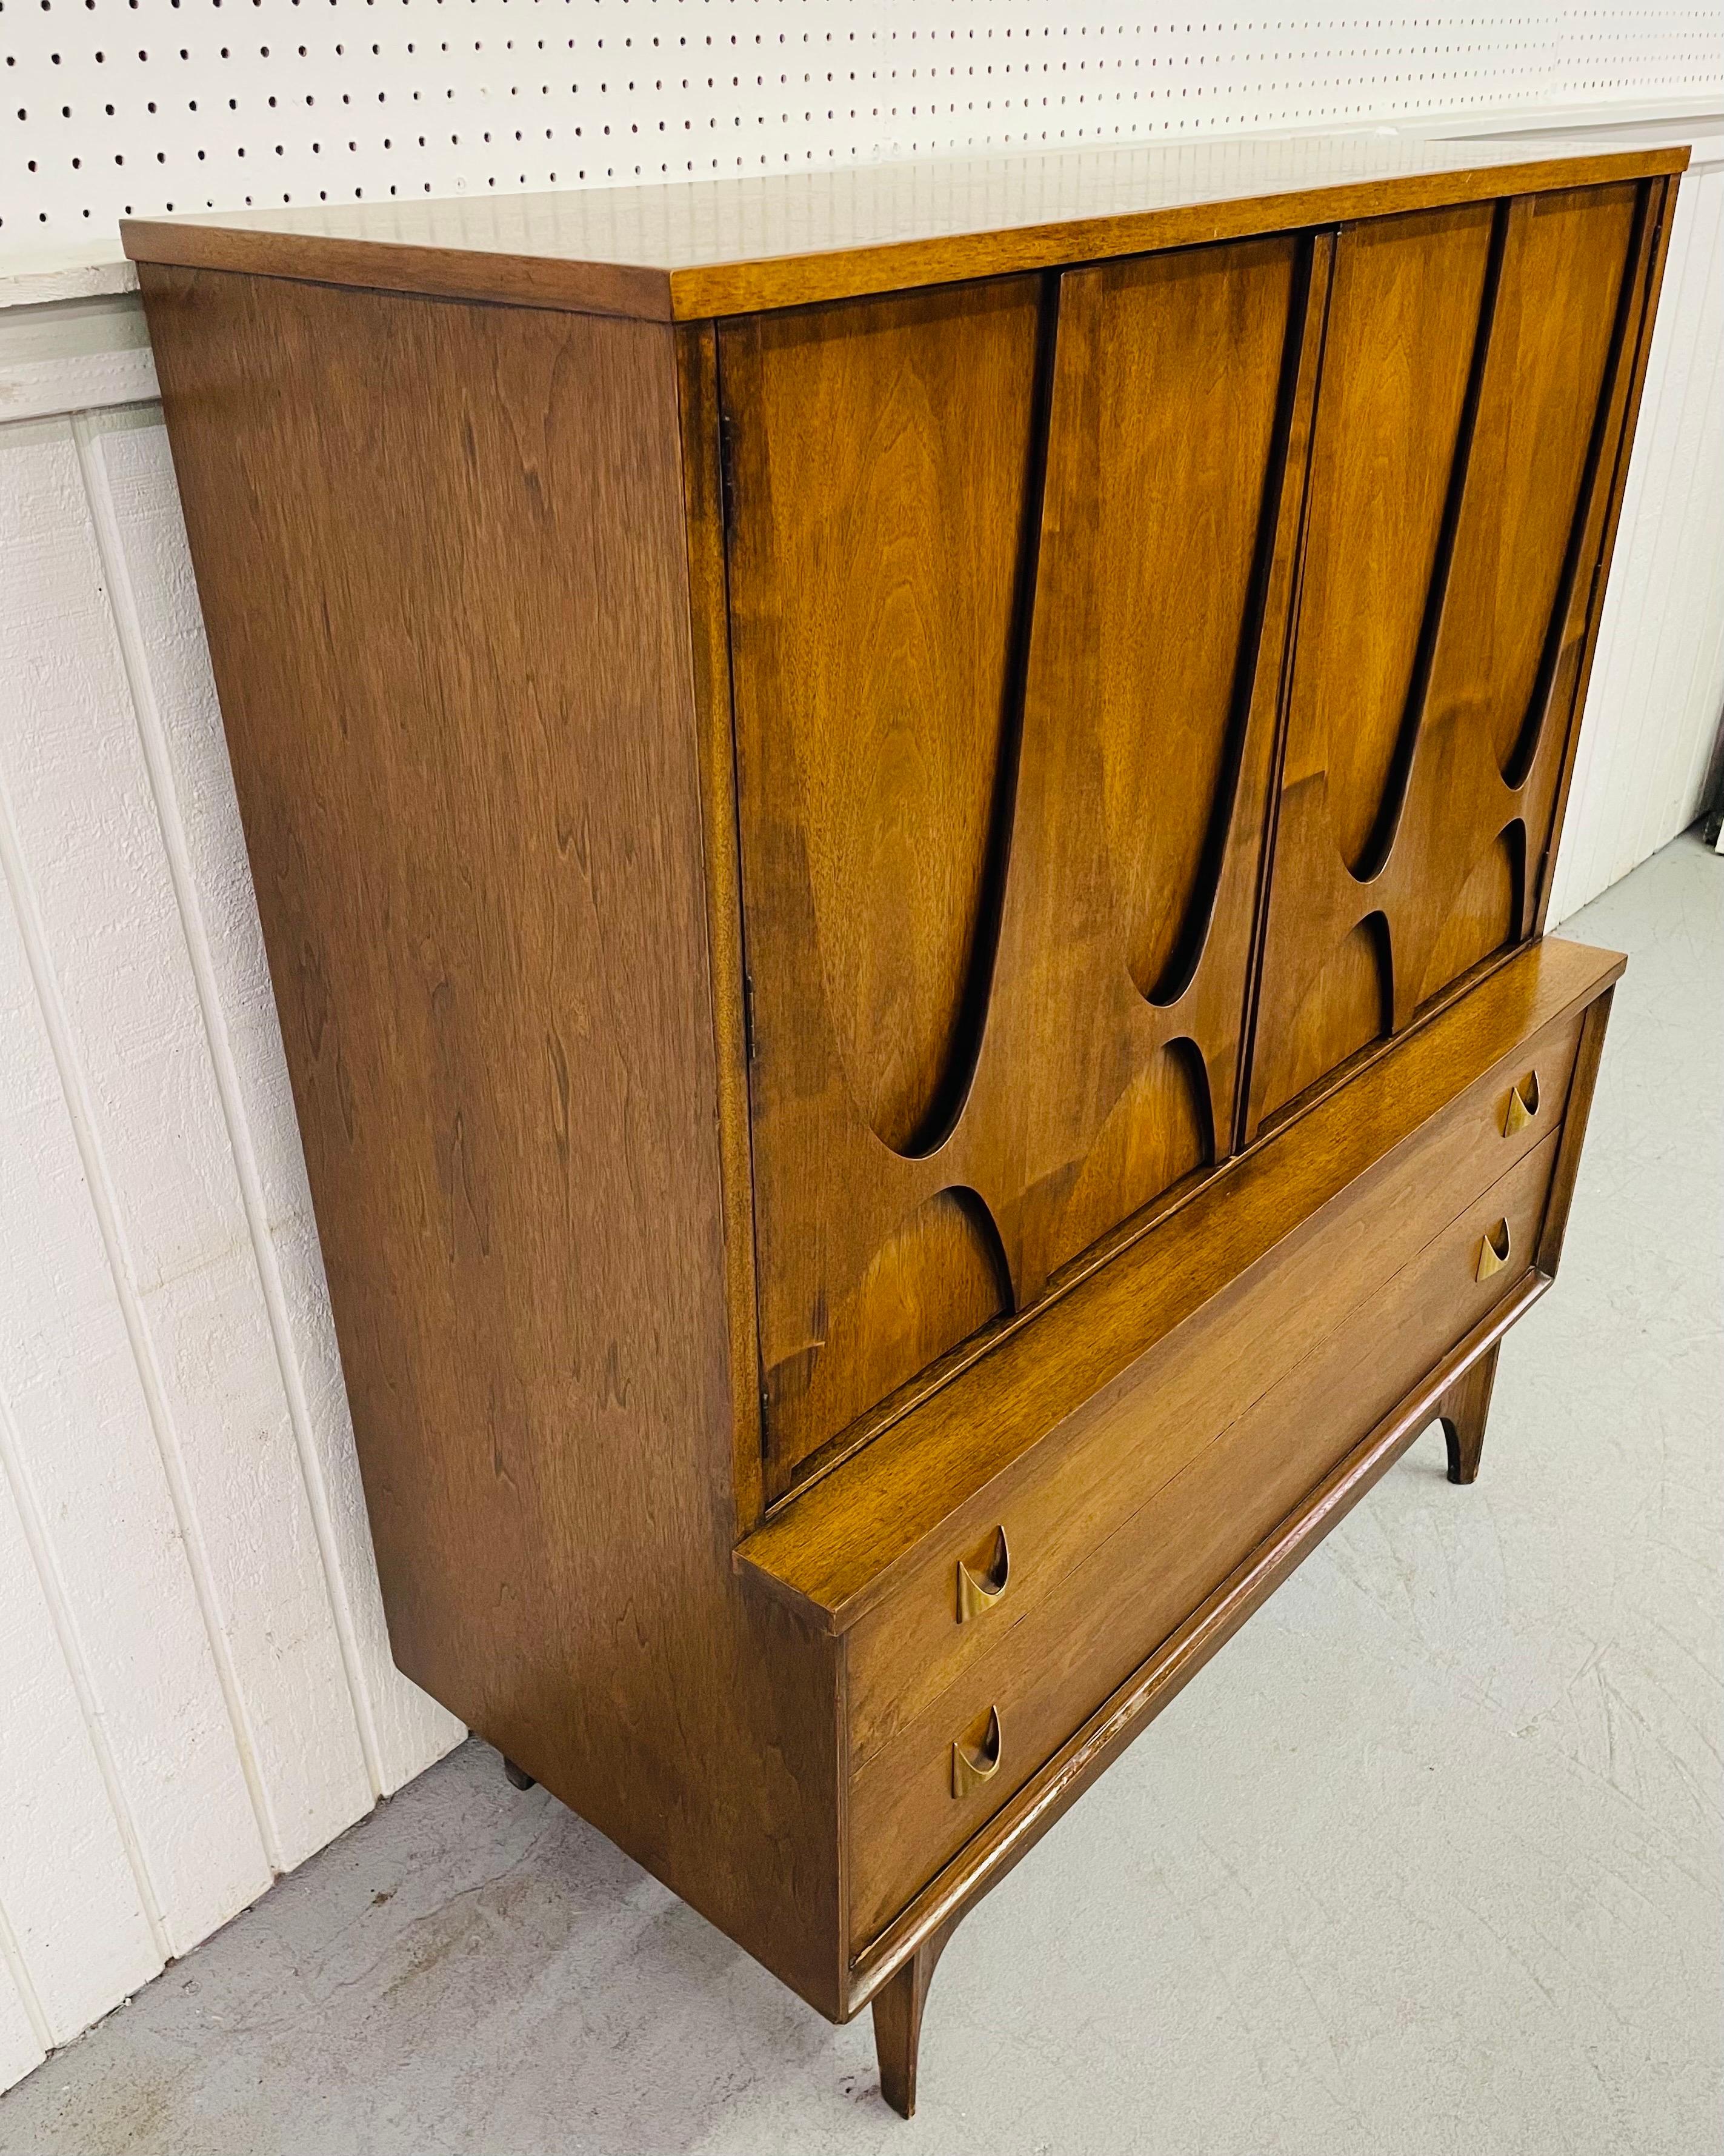 This listing is for a Mid-Century Broyhill Brasilia Walnut Gentleman’s Chest. Featuring doors that open up, six drawers for storage, two shelves, original Brasilia hardware, and the original tag in the drawer.